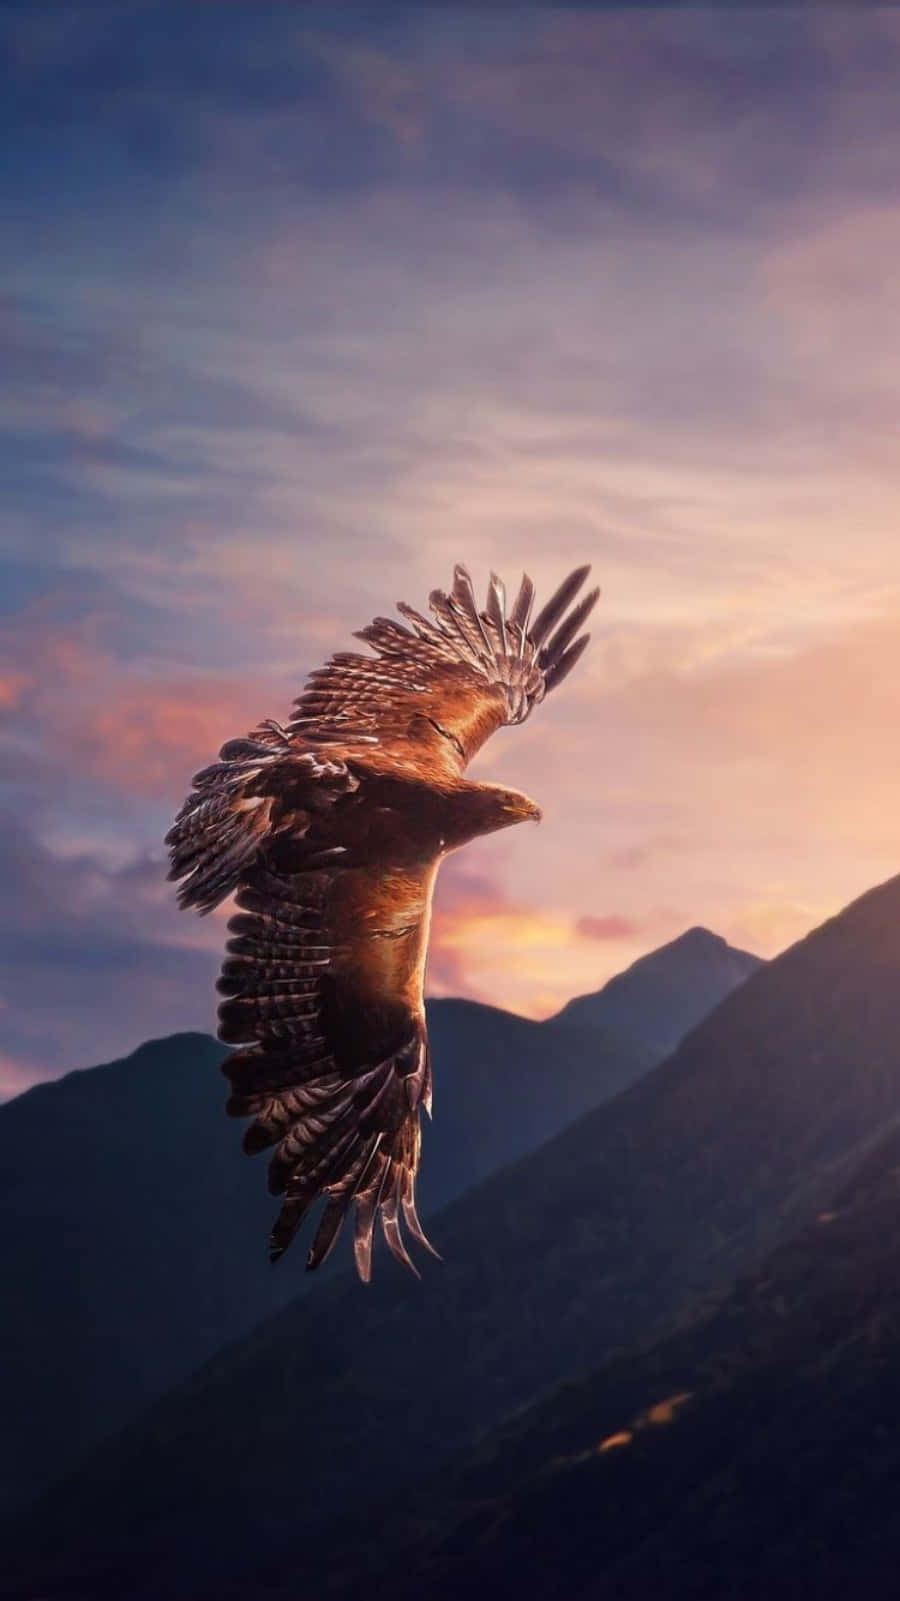 Capture the Beauty of an Eagle with this iPhone Wallpaper